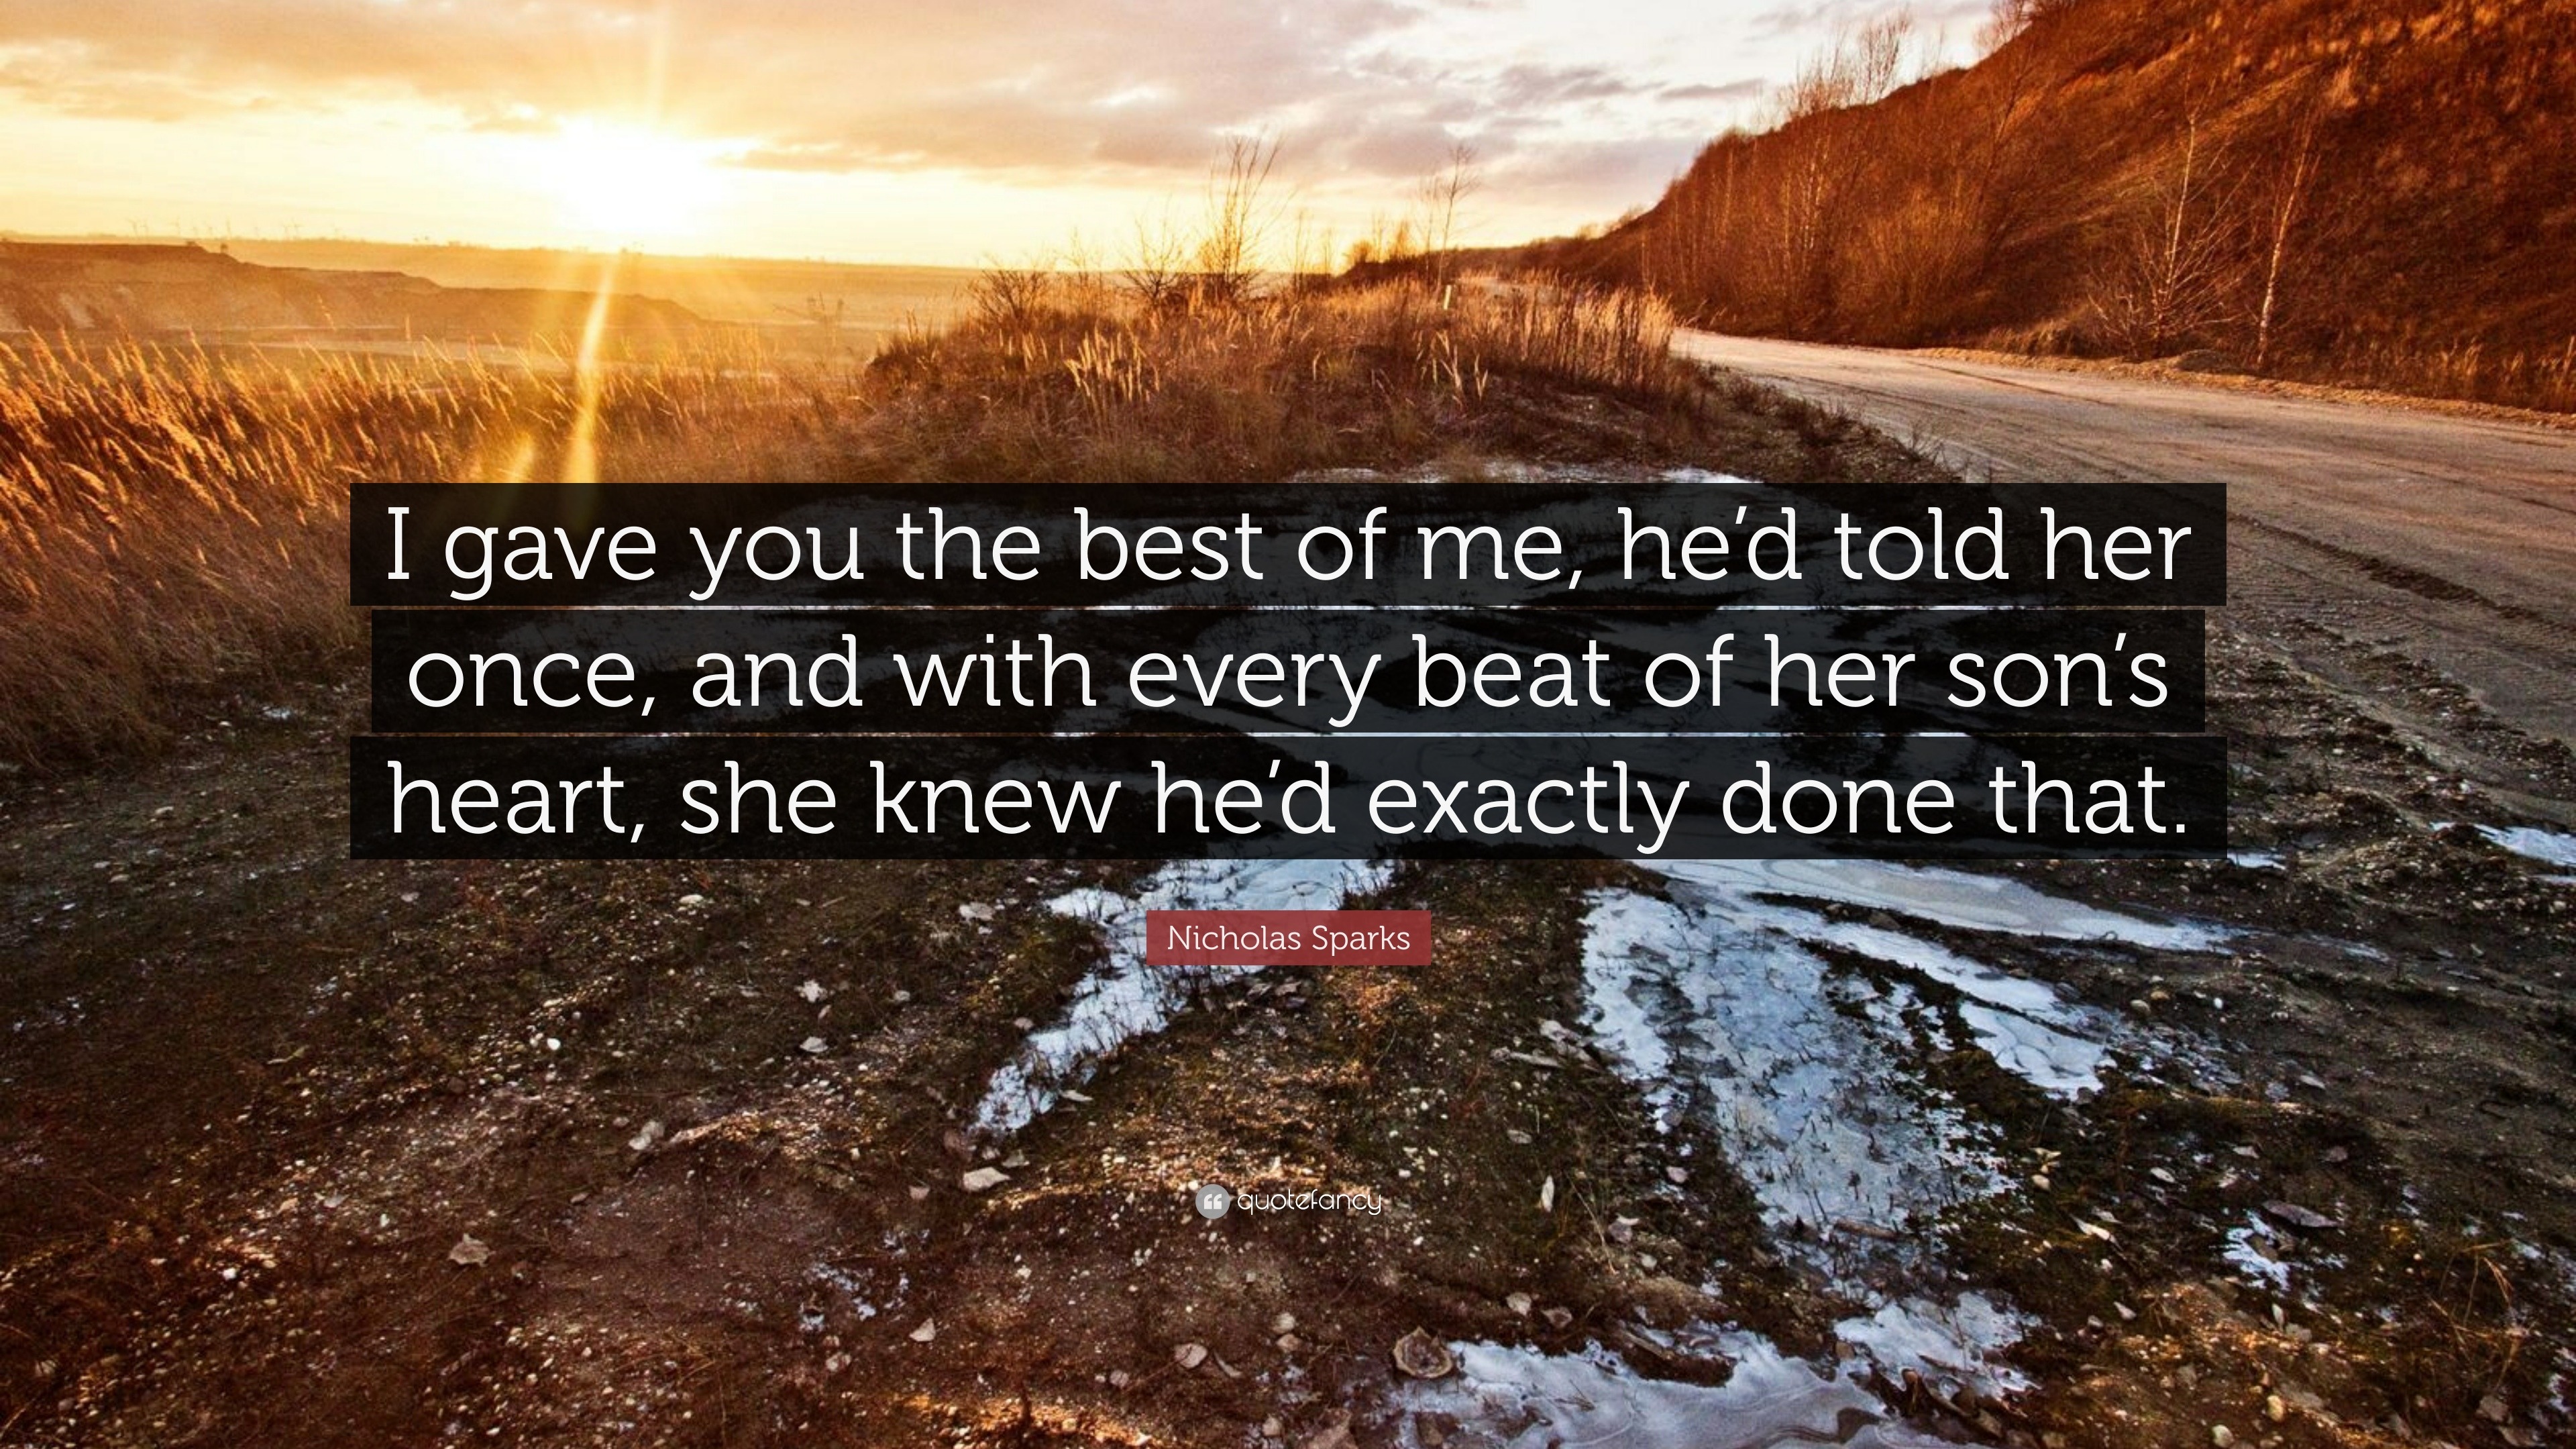 Nicholas Sparks Quote I Gave You The Best Of Me He D Told Her Once And